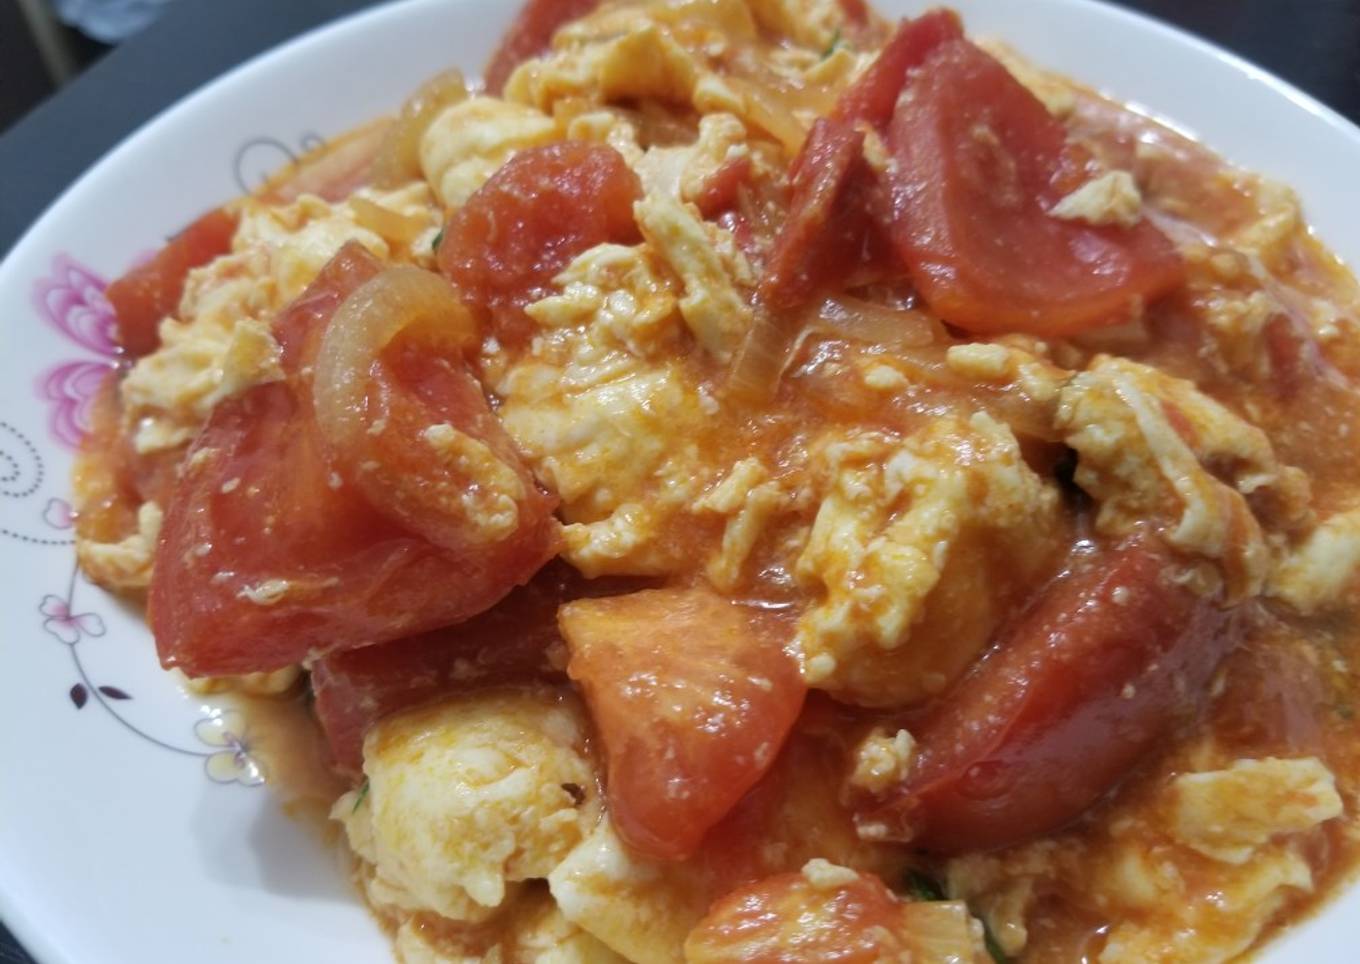 Chinese Stir Fry Tomato with Eggs 番茄炒蛋